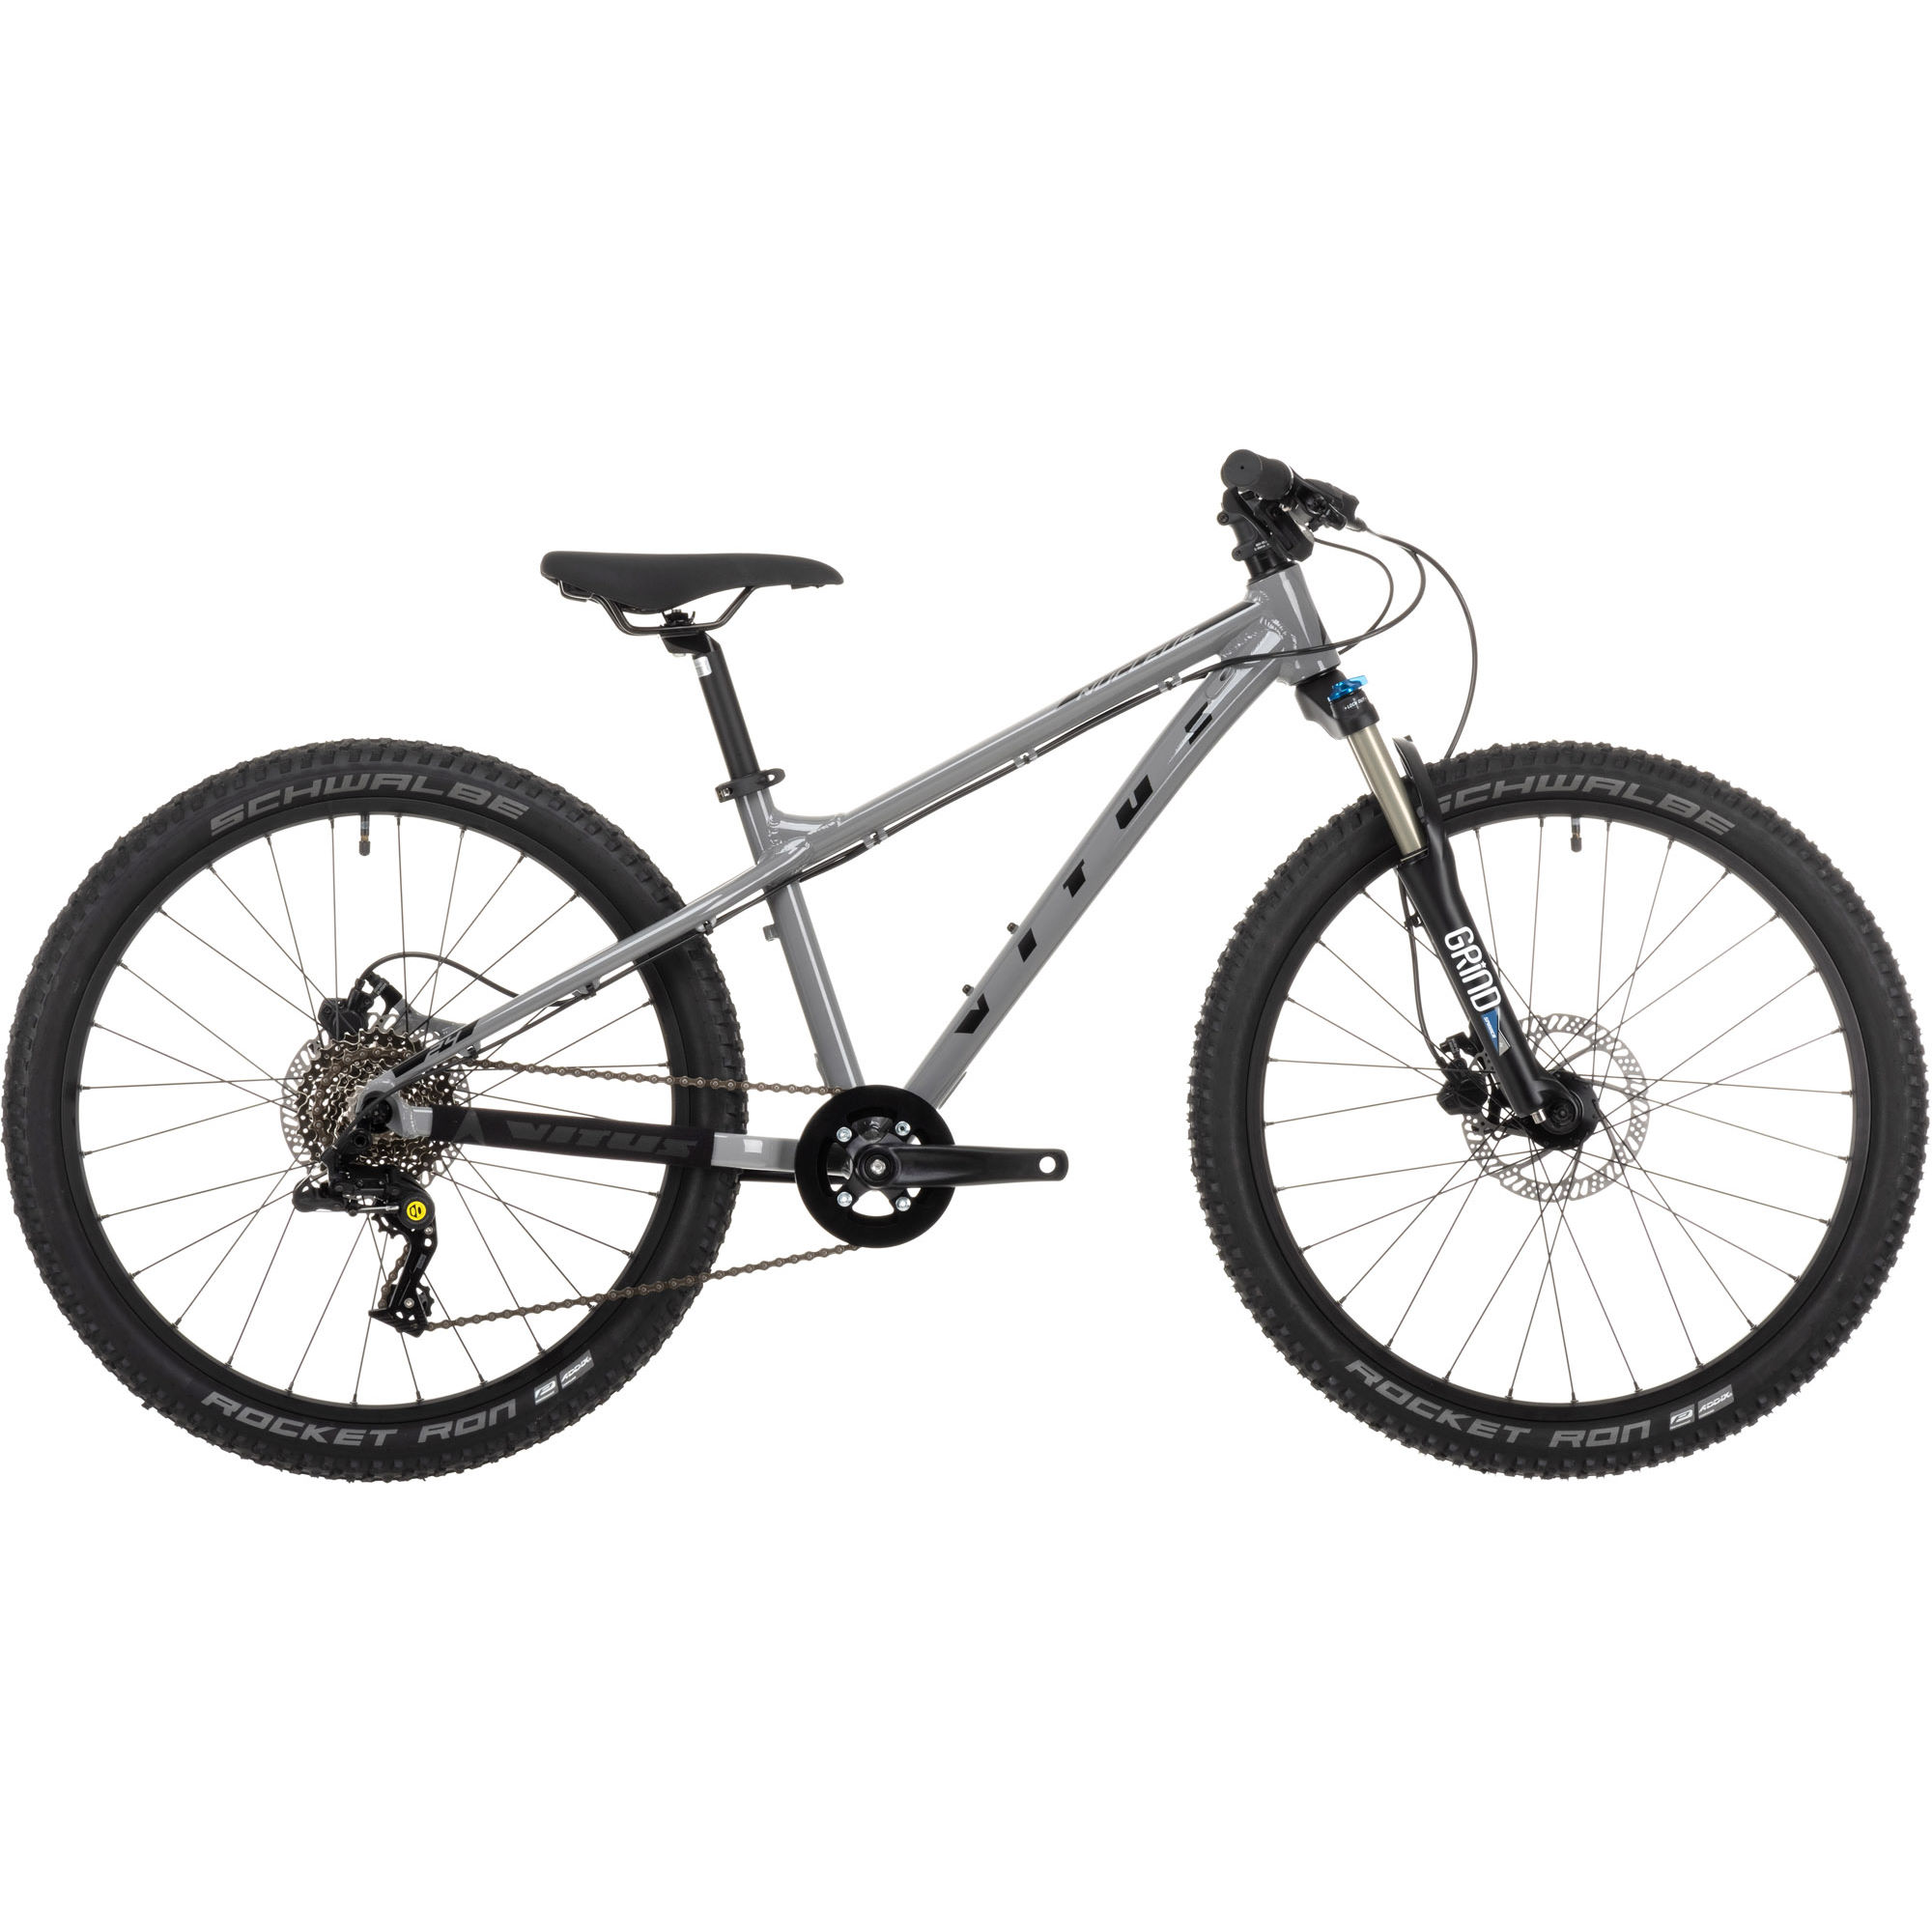 24 Youth Hardtail Bike by Vitus Nucleus